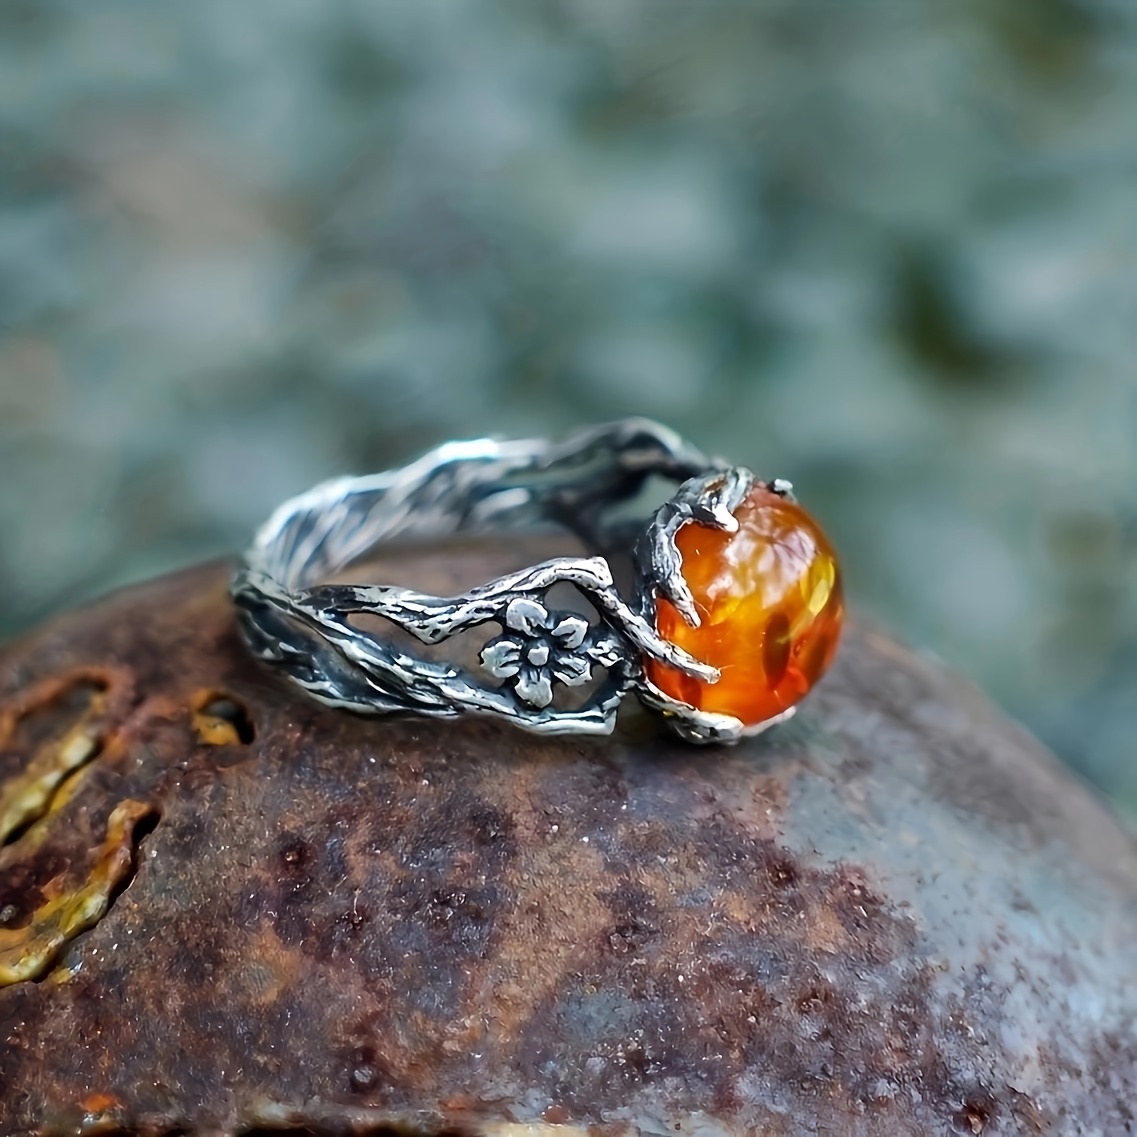 

1pc New Ancient Water Drop Anti Amber Stone Honey Wax Ring With Carved Flowers And Branches, Elegant And Elegant Style Ring For Men And Women